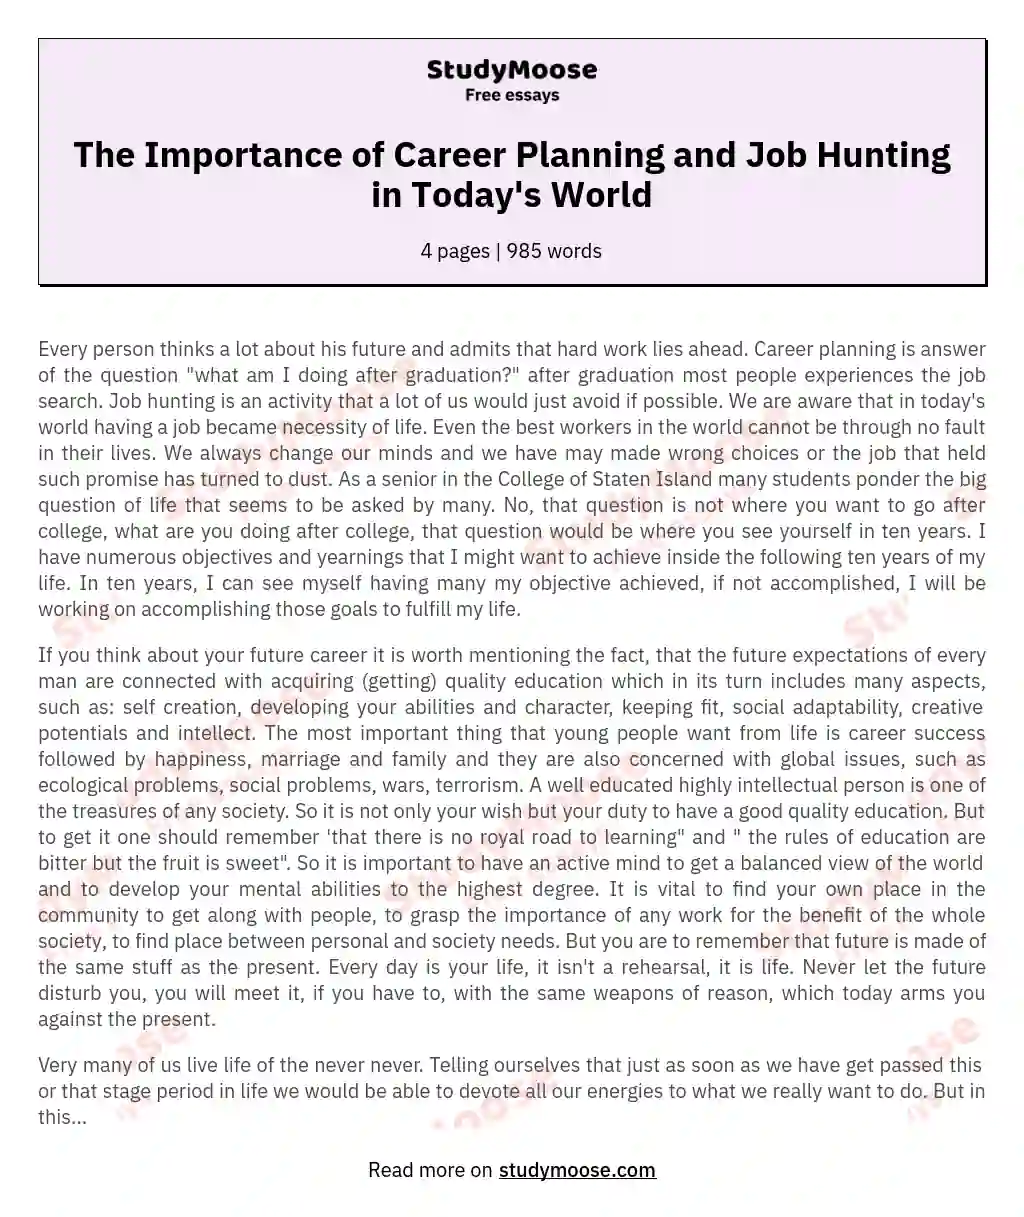 The Importance of Career Planning and Job Hunting in Today's World essay